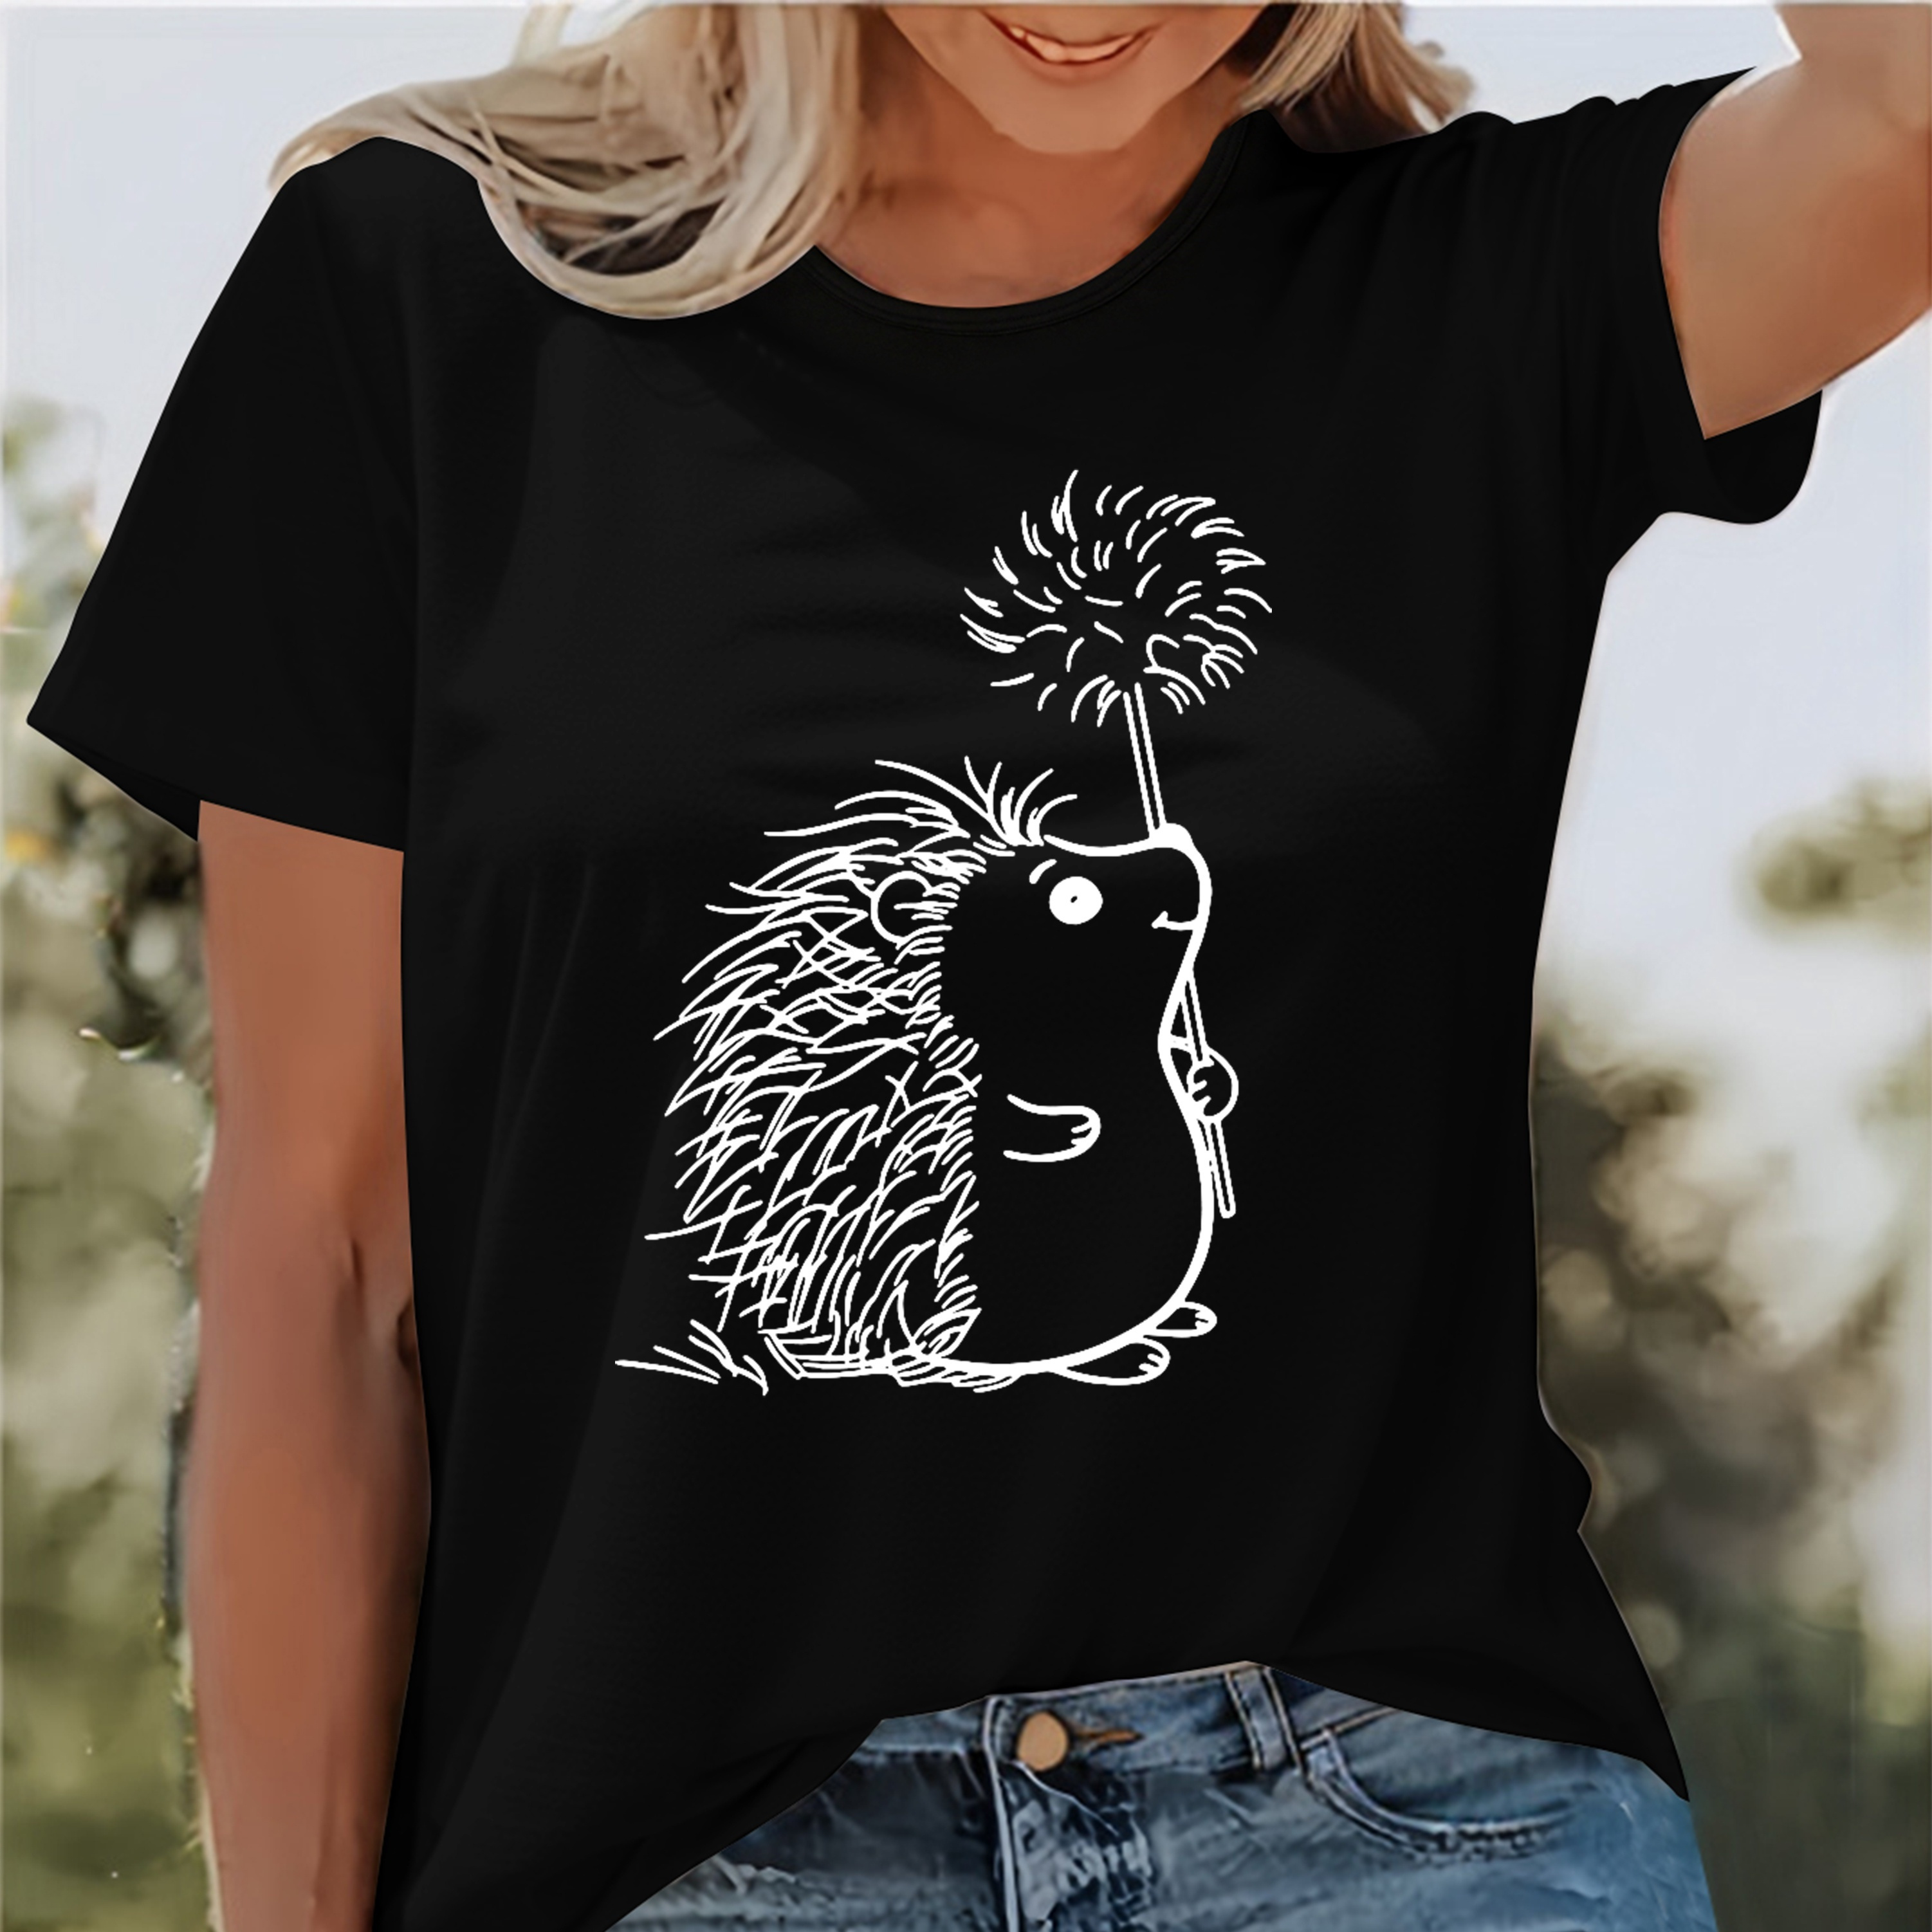 

Hedgehog Print Crew Neck T-shirt, Short Sleeve Casual Top For Summer & Spring, Women's Clothing